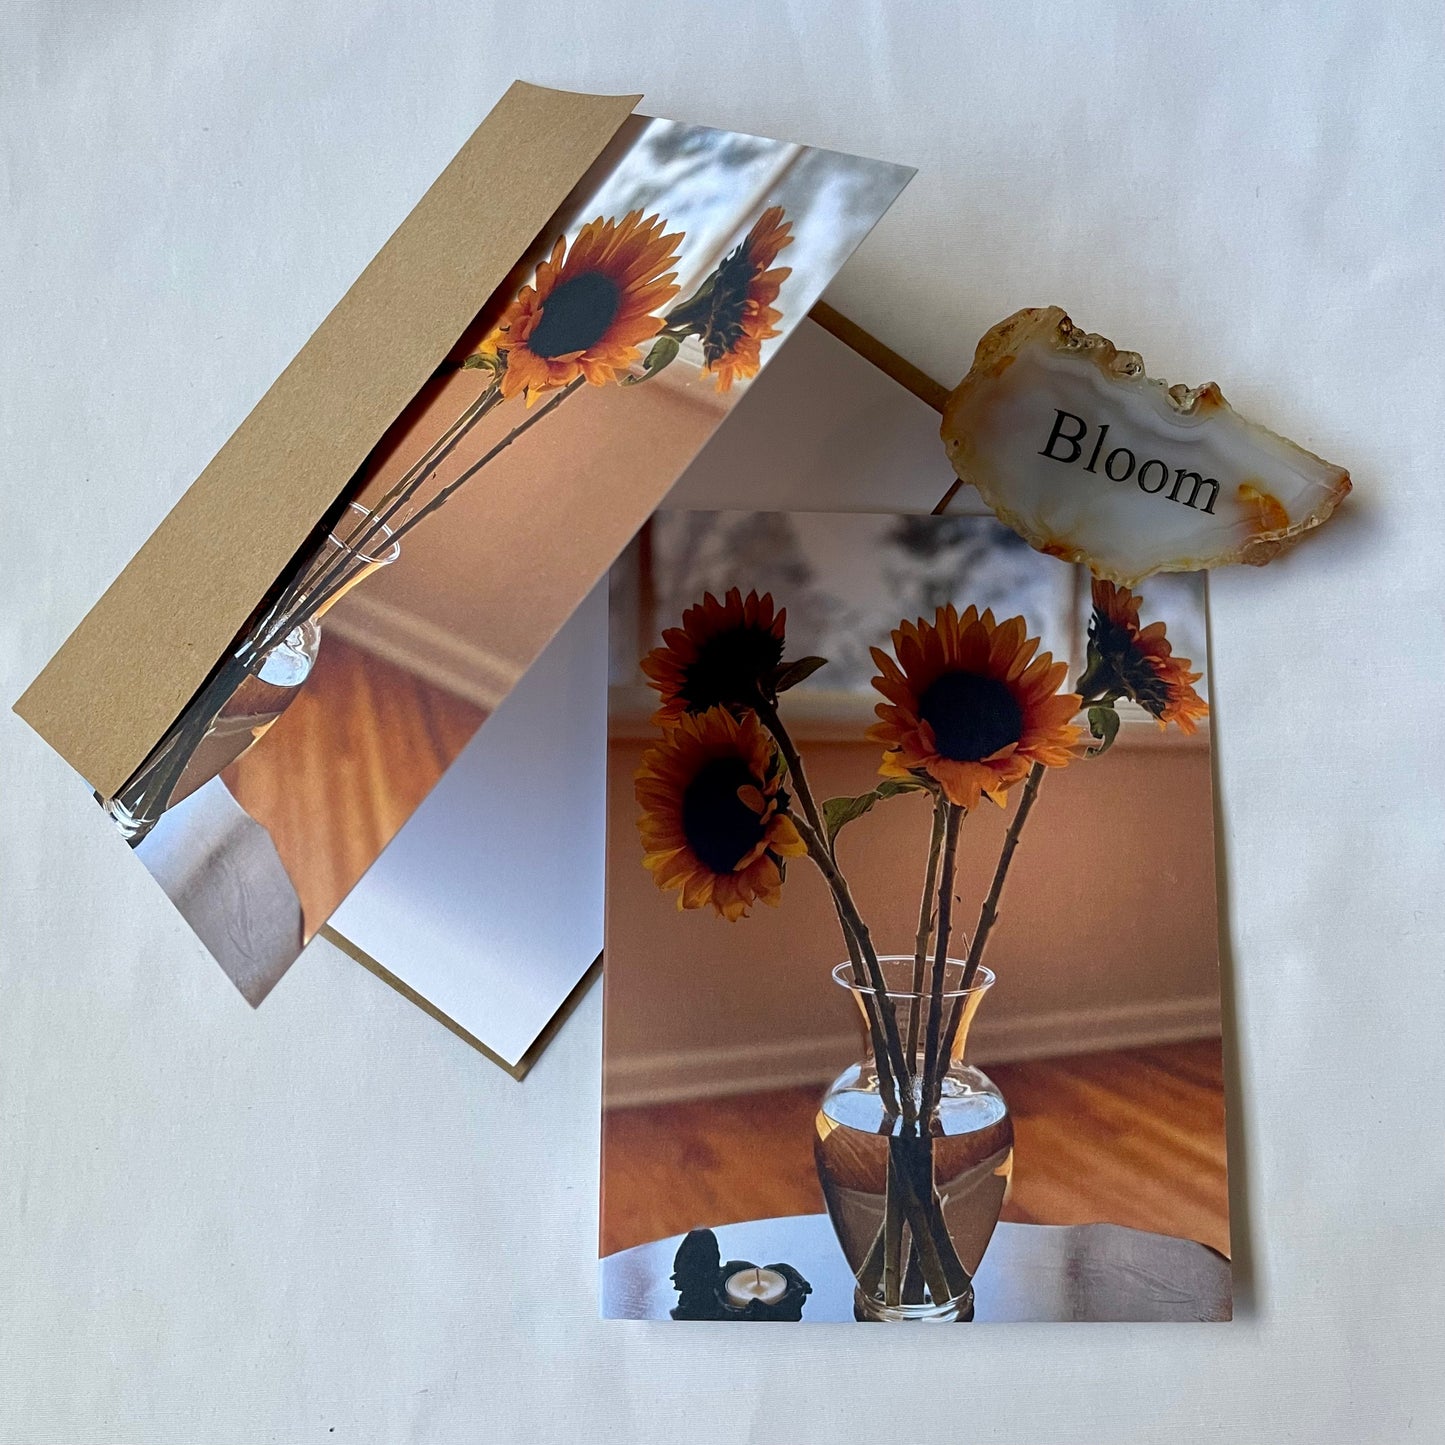 Sunflowers Still Life in Vase Original Nature Photography Greeting Card Boxed Set of 6 with Kraft Envelopes